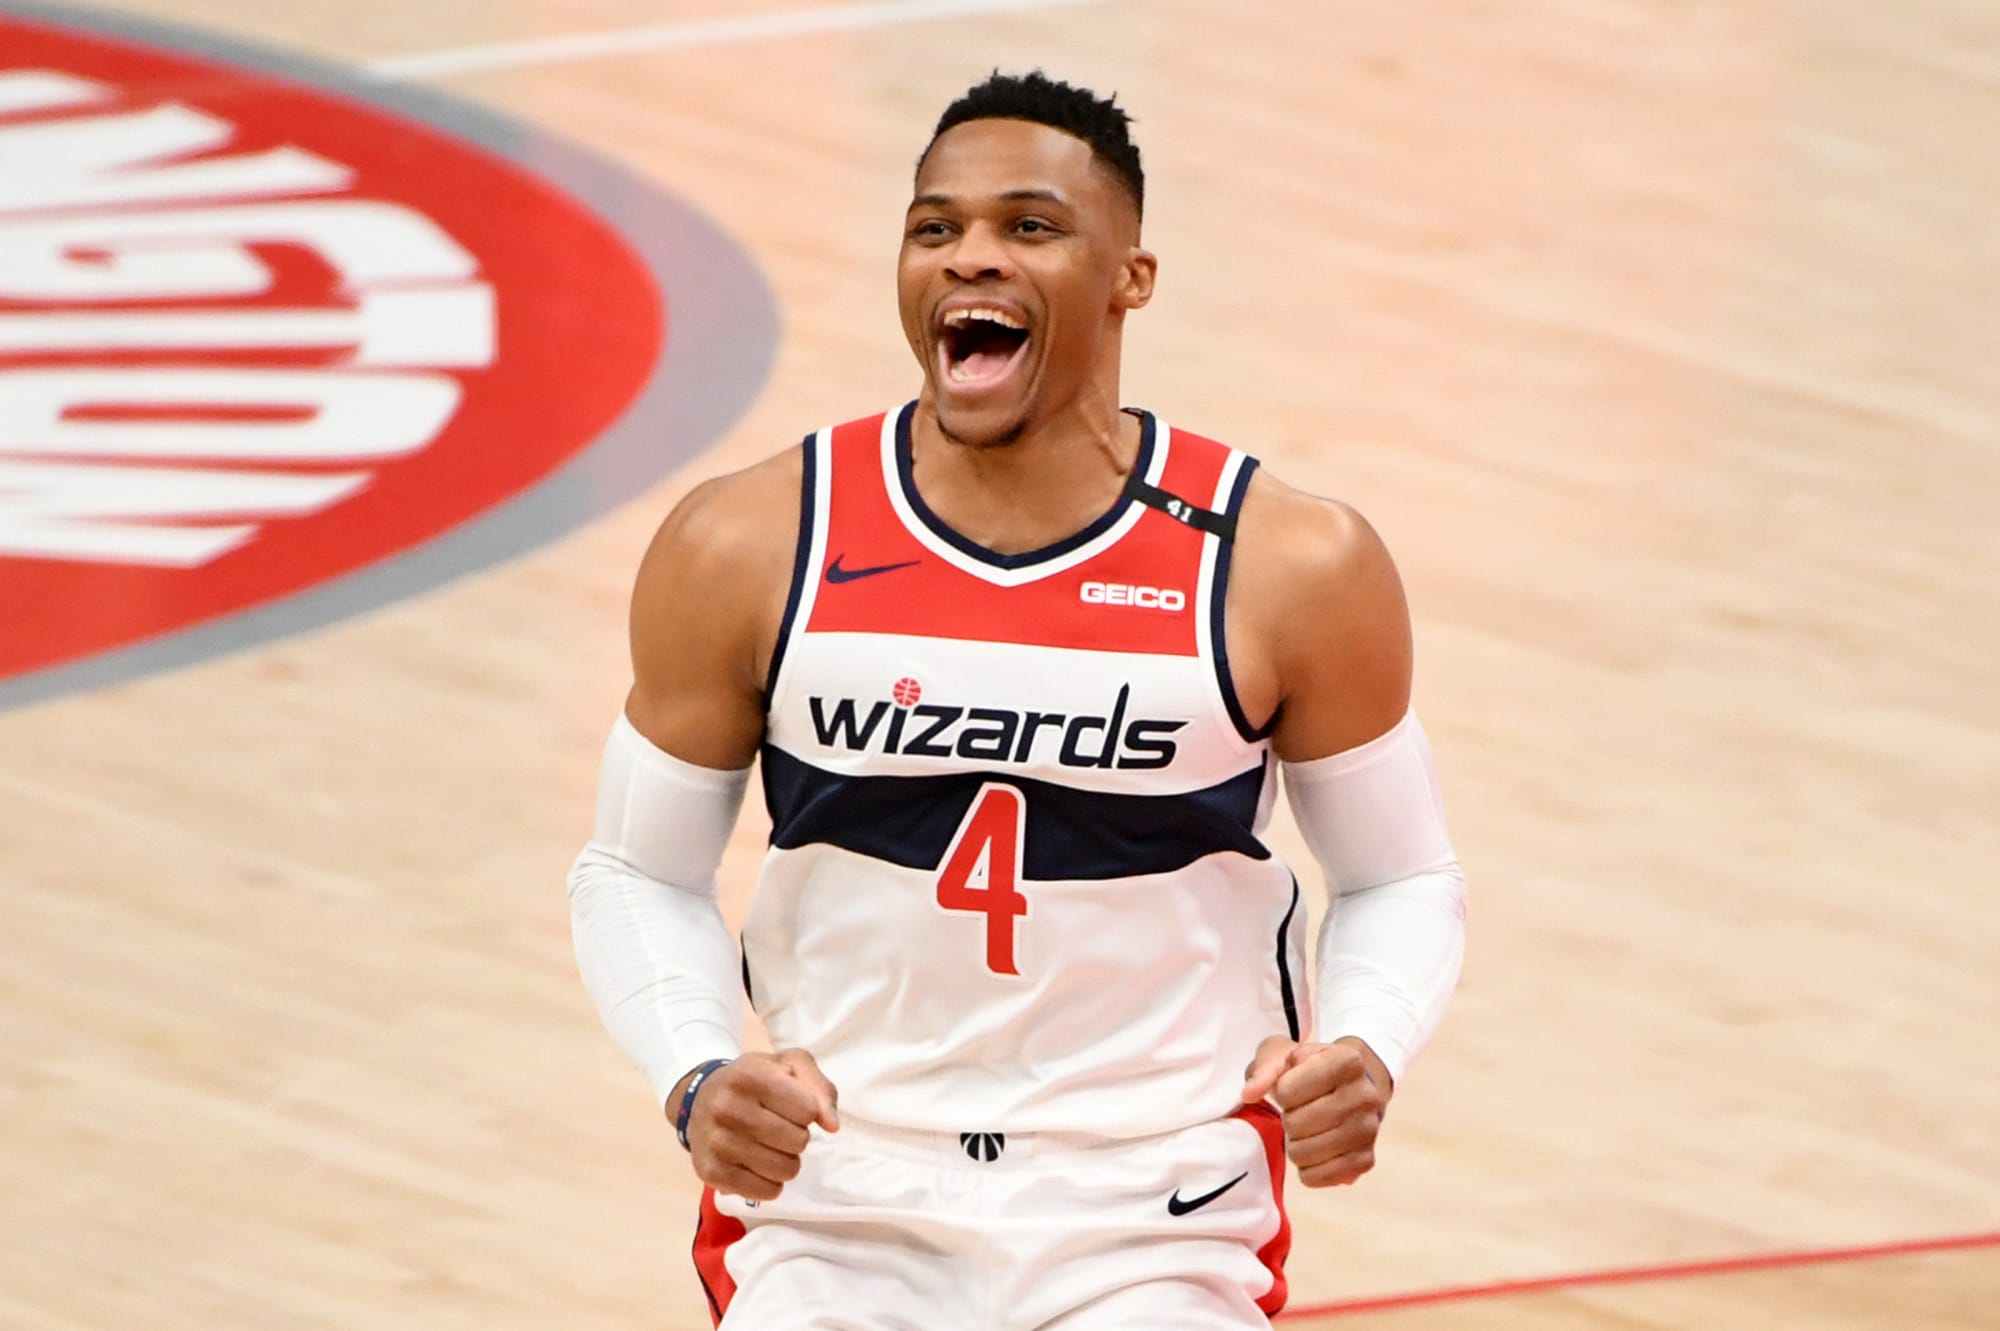 Russell Westbrook Reveals He's Changing His Jersey Number With Wizards